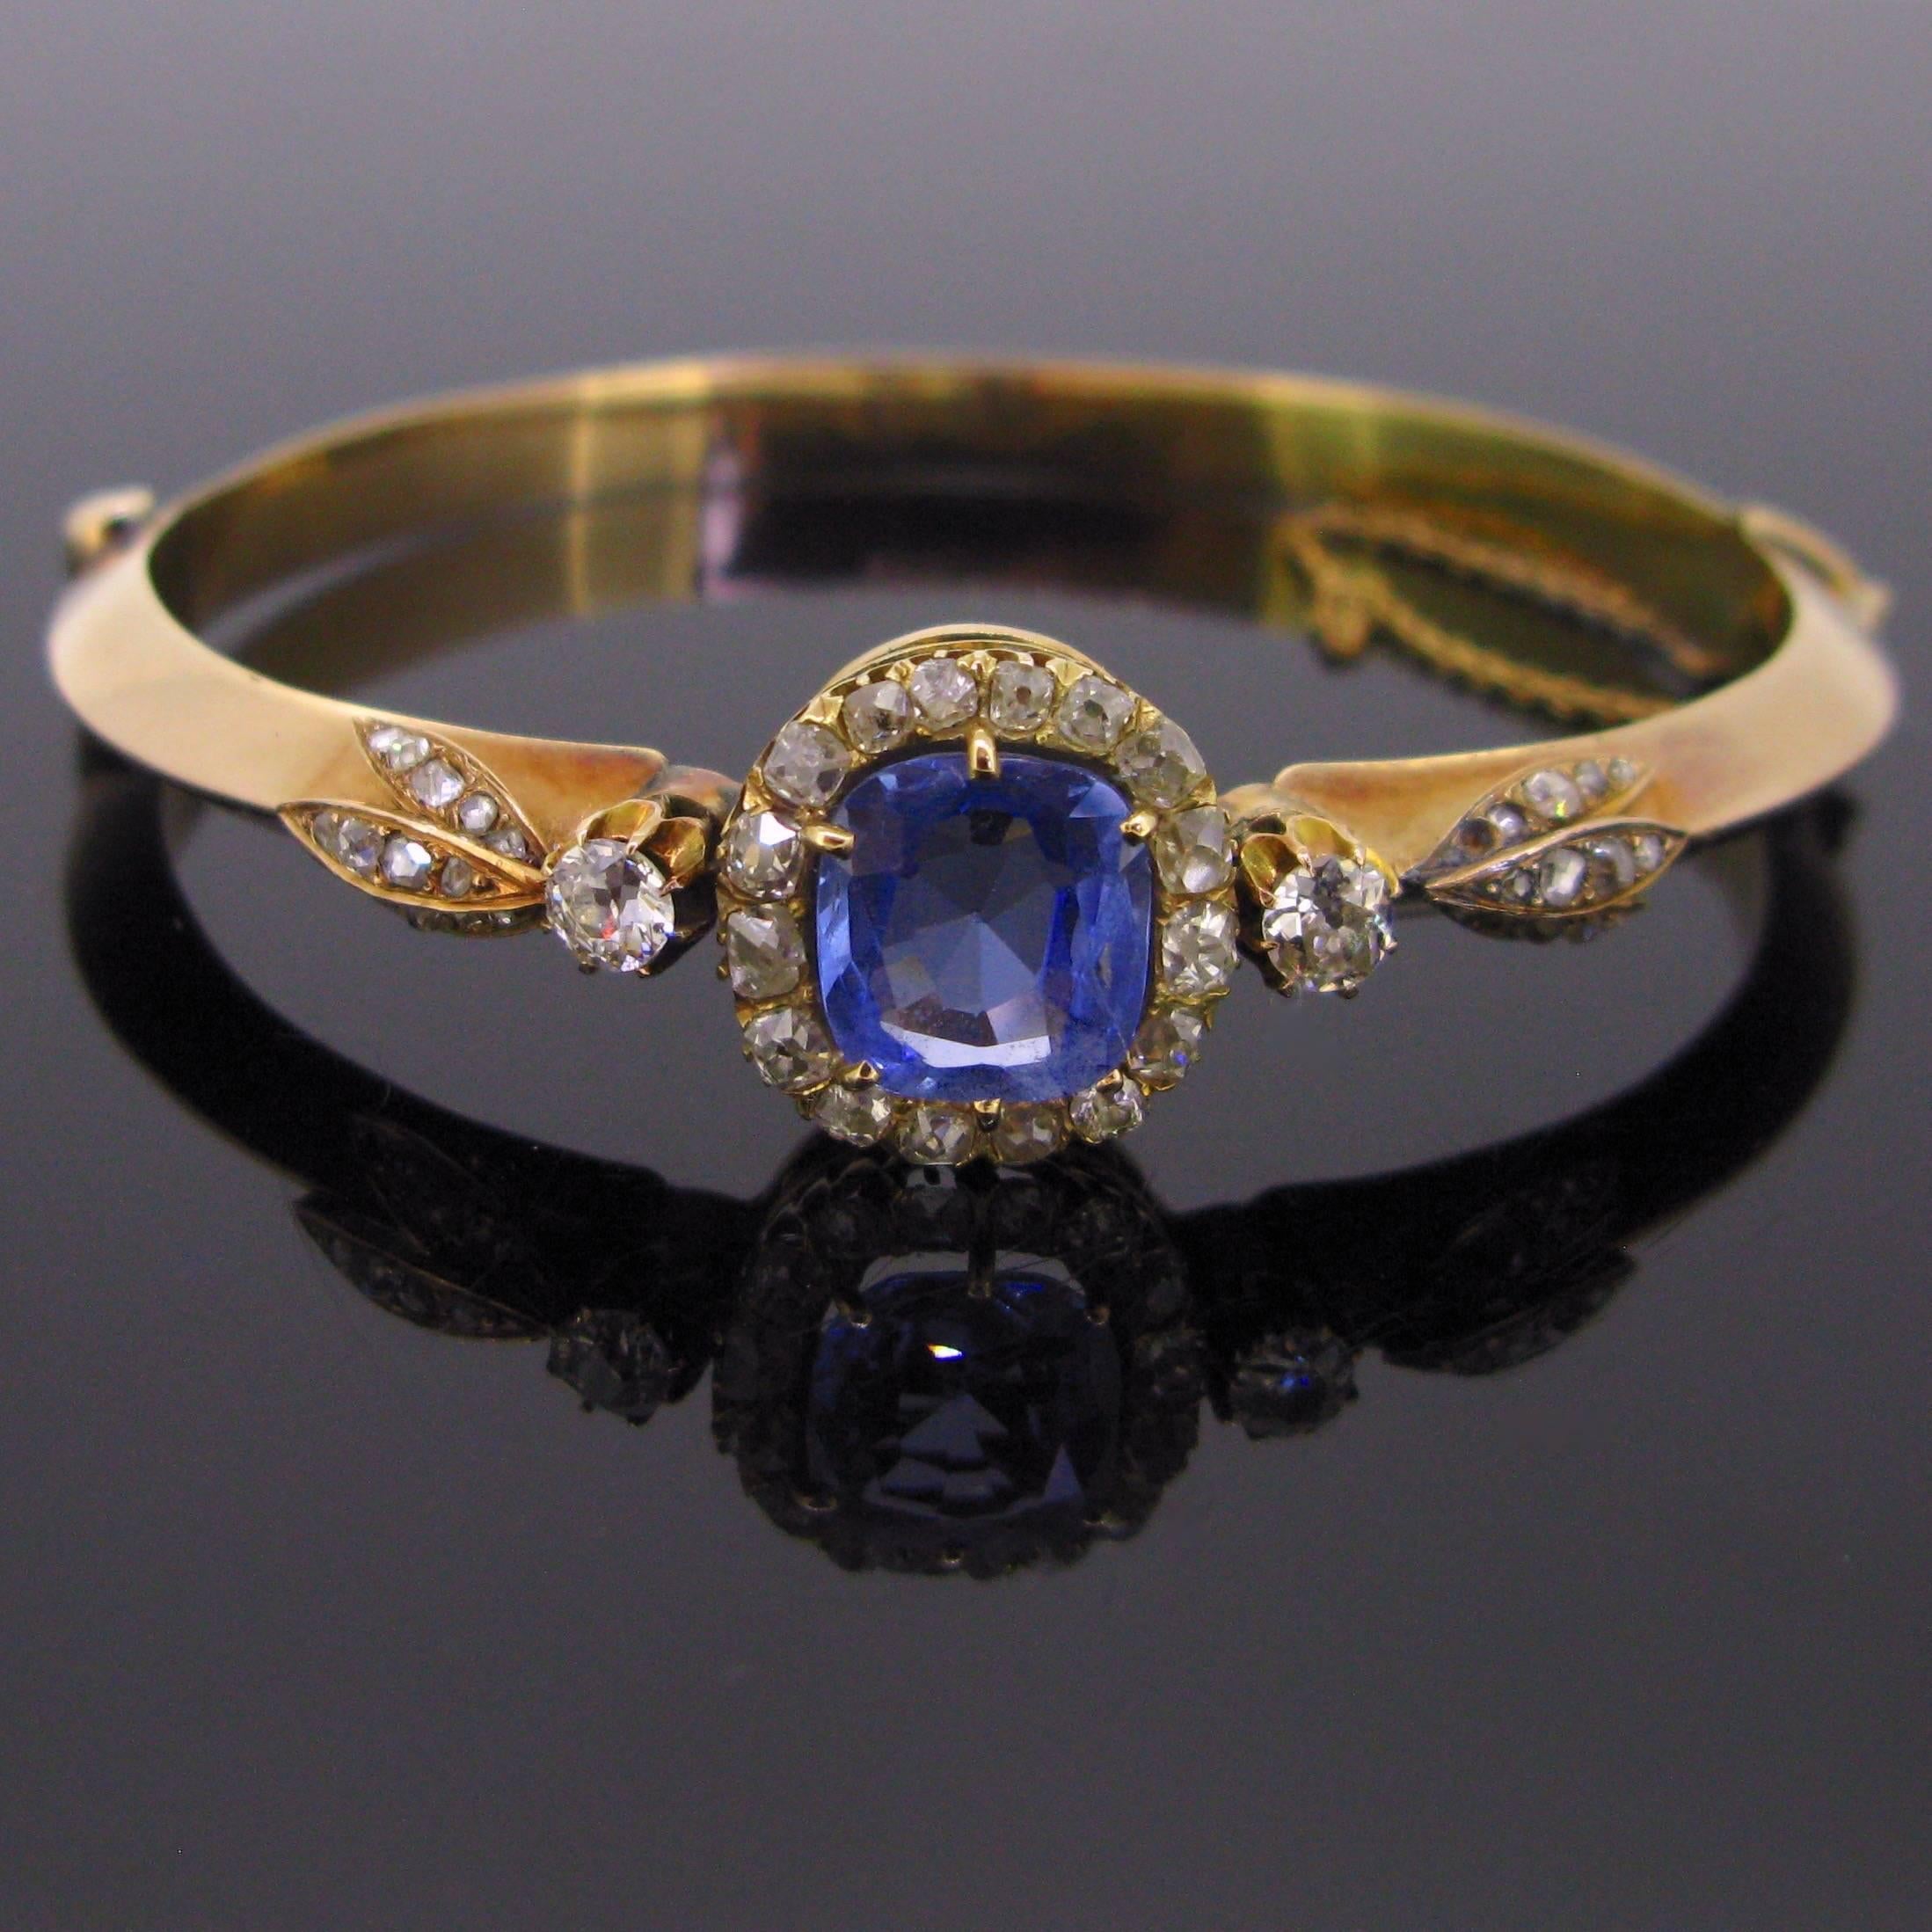 This beautiful bangle is set with a Ceylon sapphire with no indication of heating. This stunning blue sapphire is around 3.60ct. It is surrounded with 16 old mine cut diamonds. The shoulders of the ring are enhanced with an old mine cut diamonds and